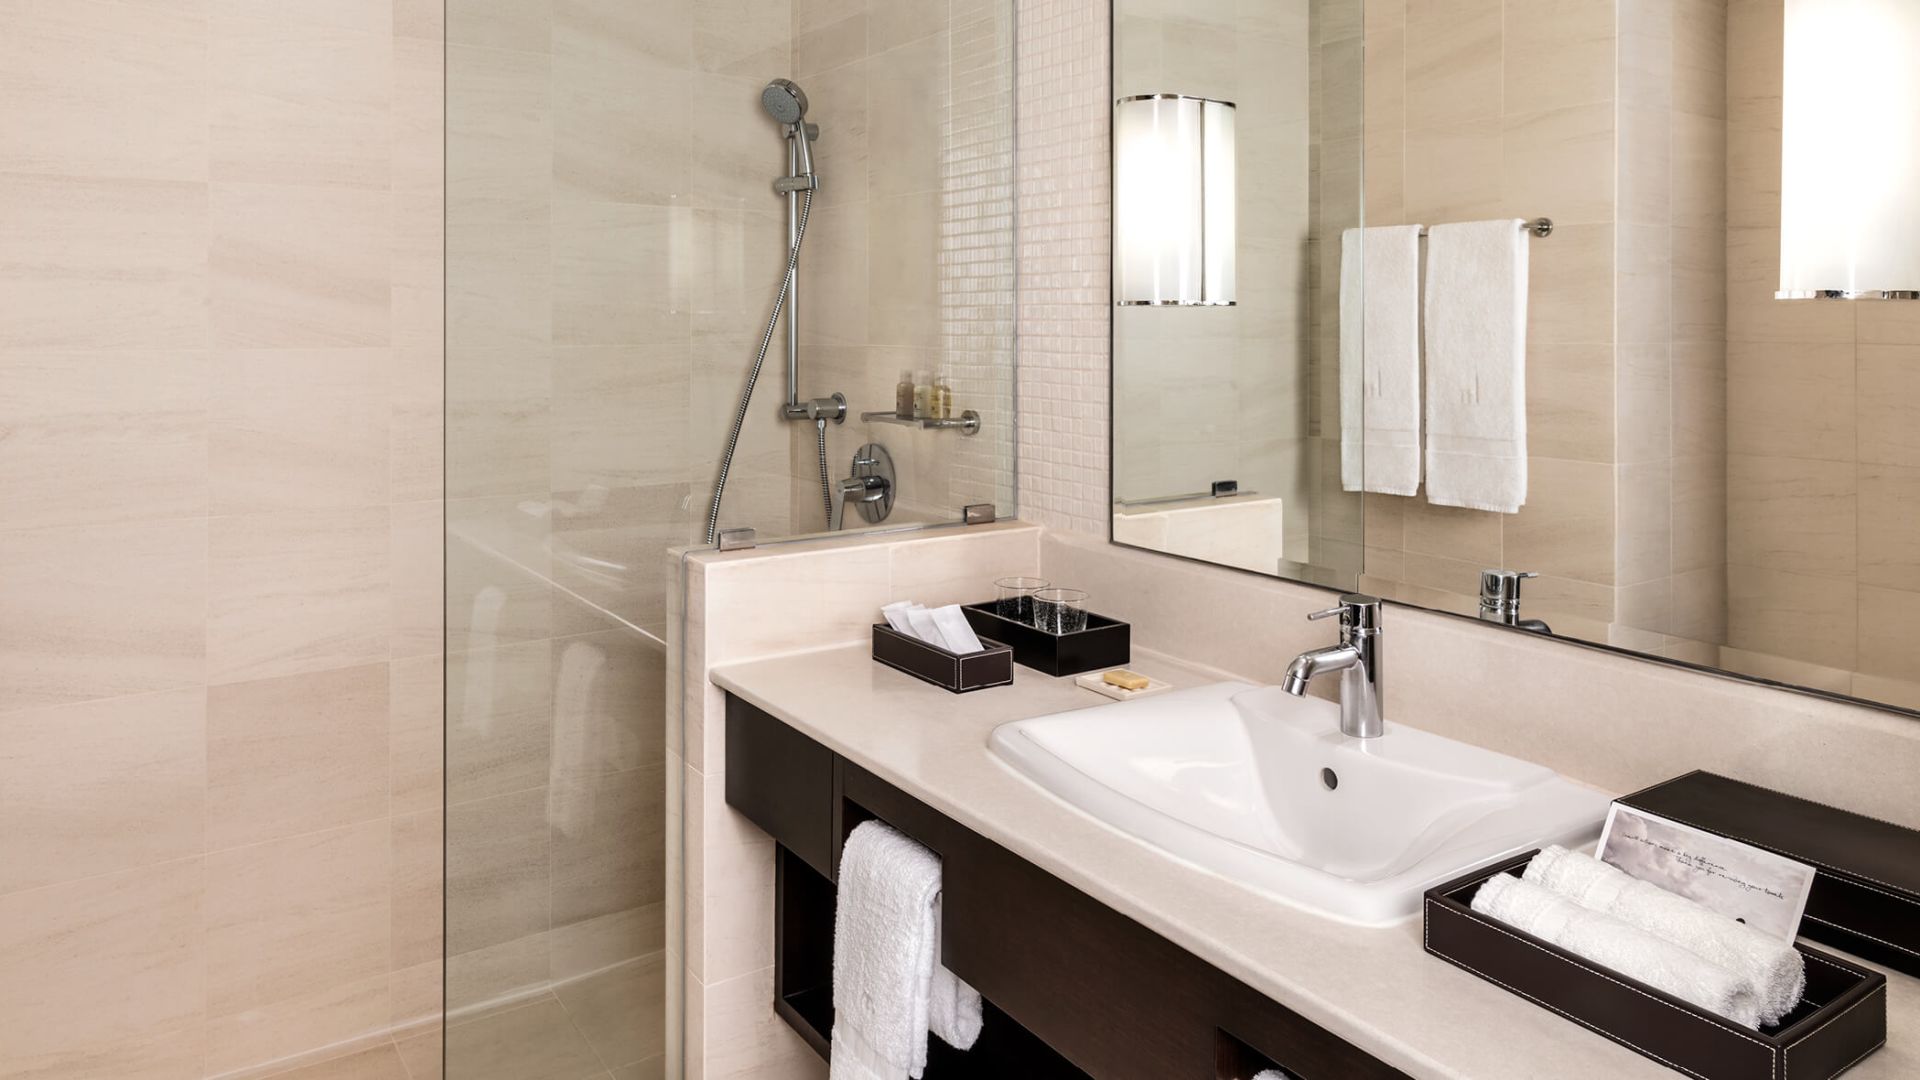 Bathroom with separated shower stall - Image